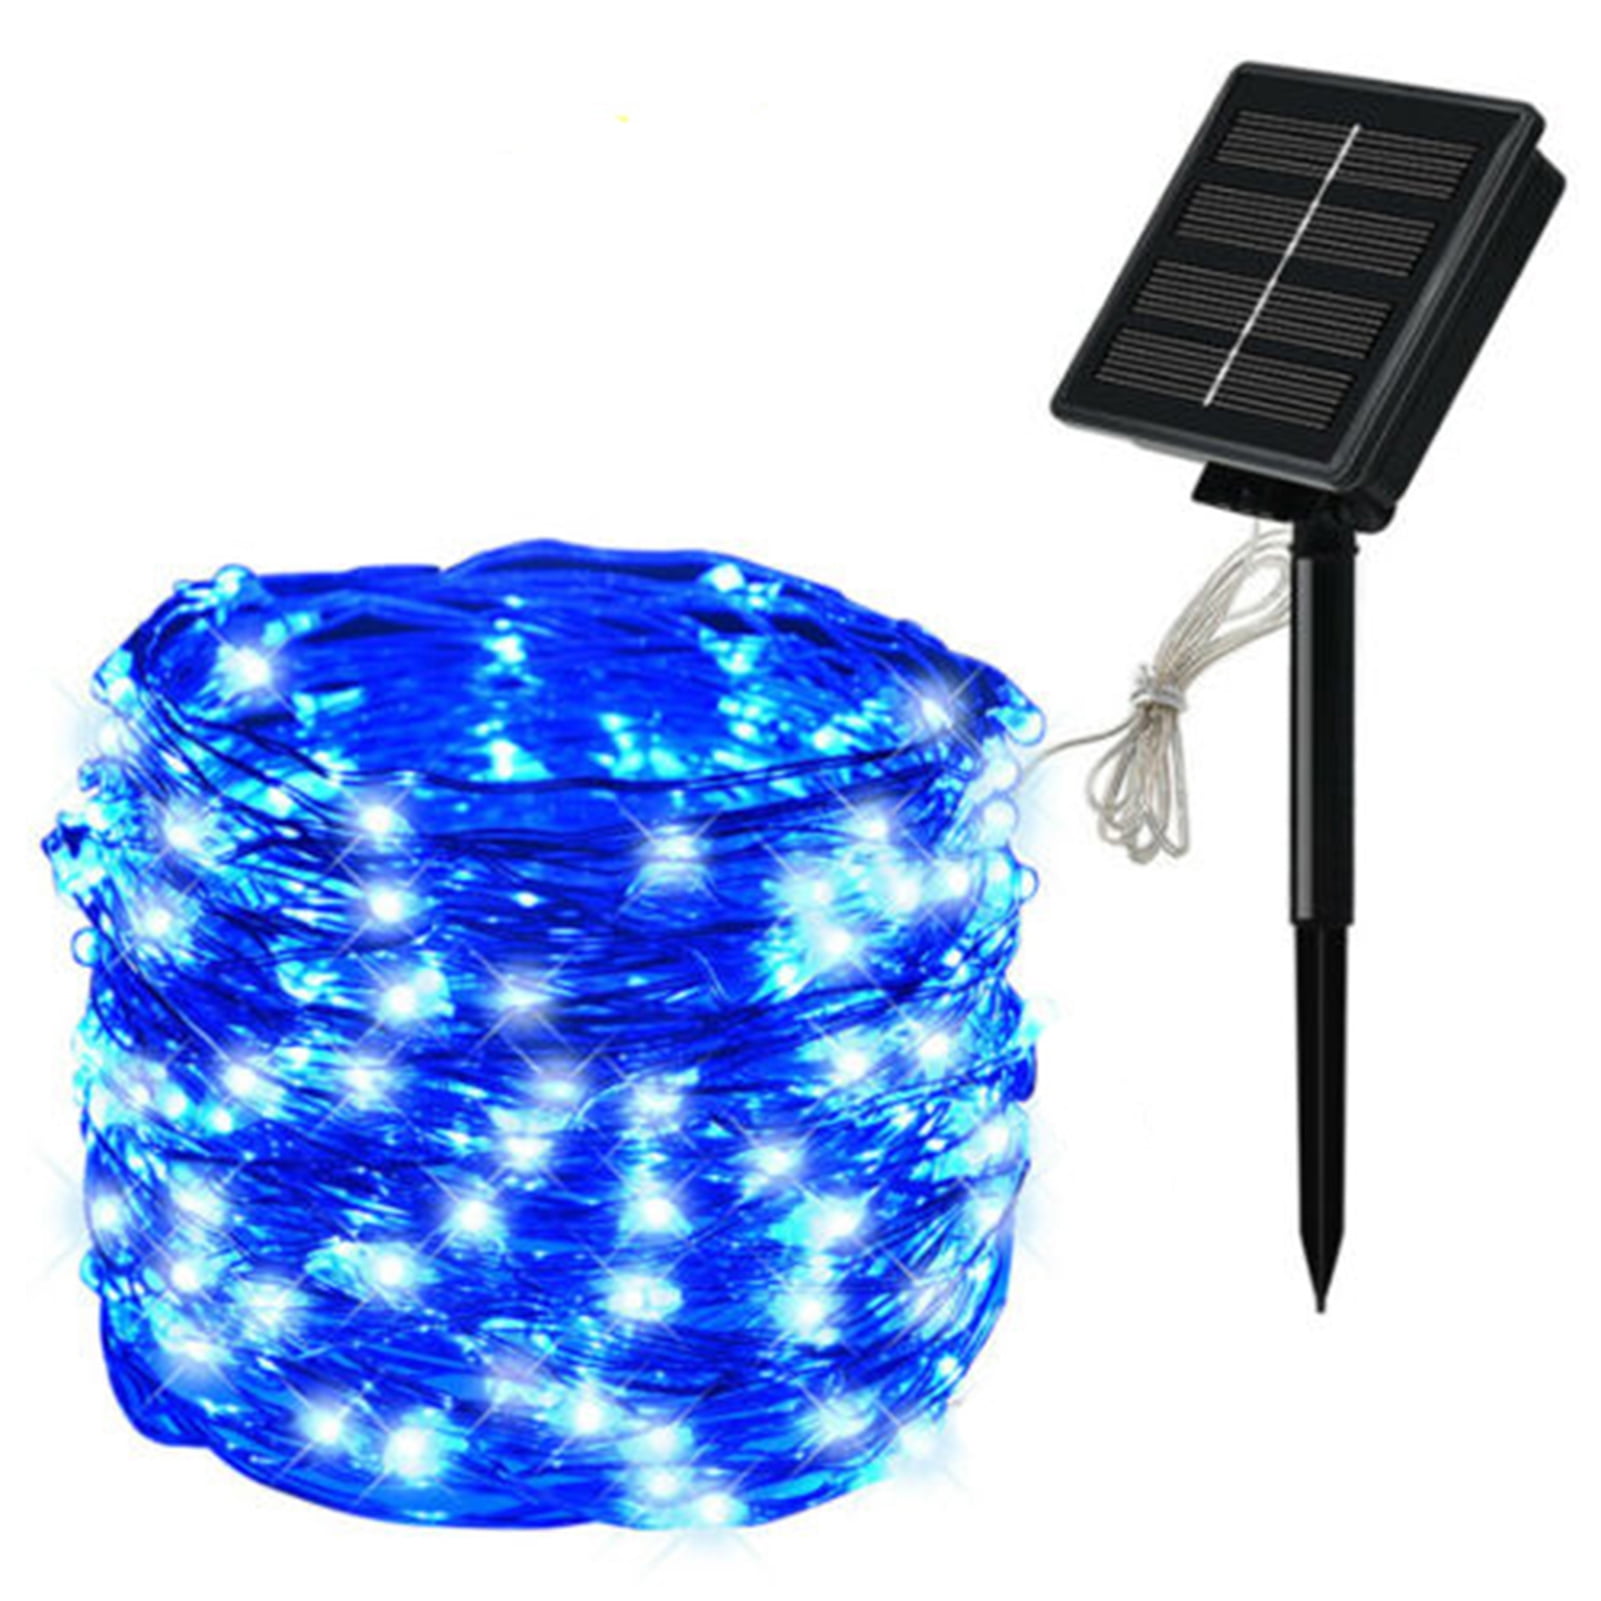 Details about   20M 200 LED Solar Fairy String Light Copper Wire Outdoor Waterproof Garden Decor